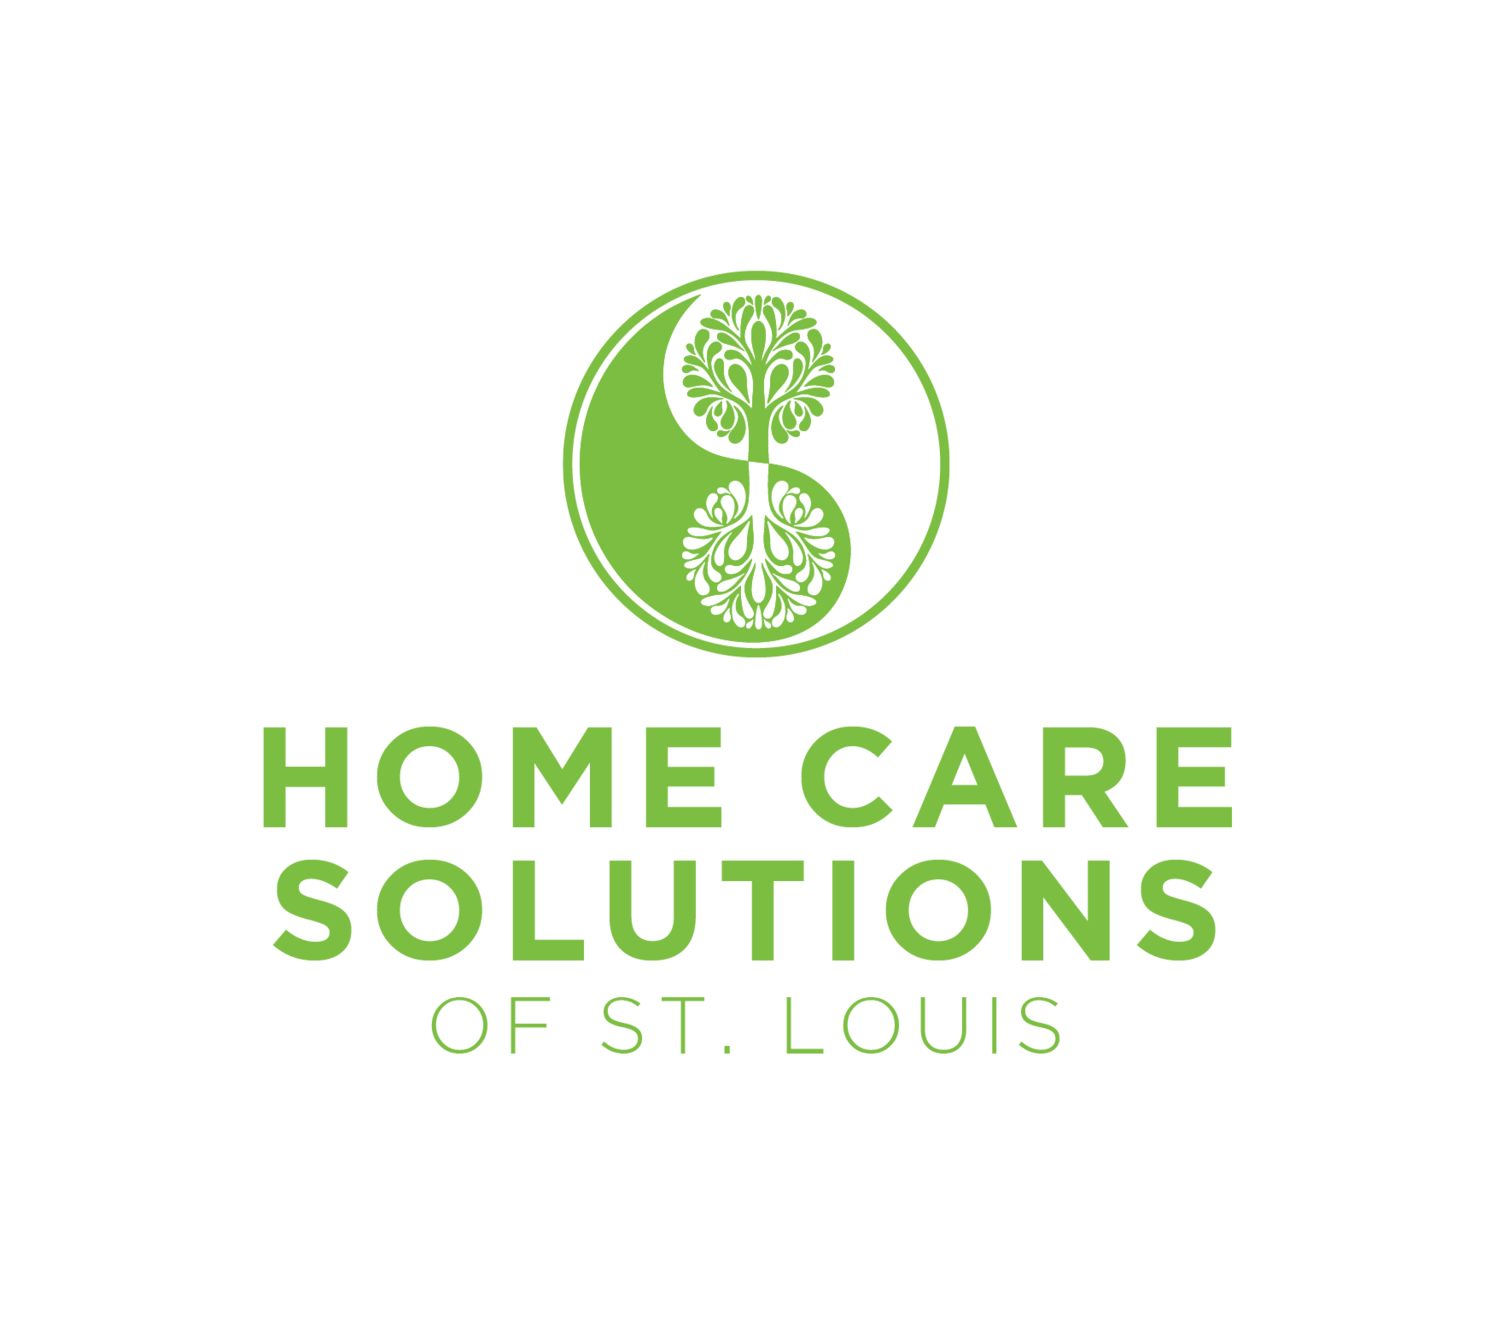 Home Care Solutions of St. Louis